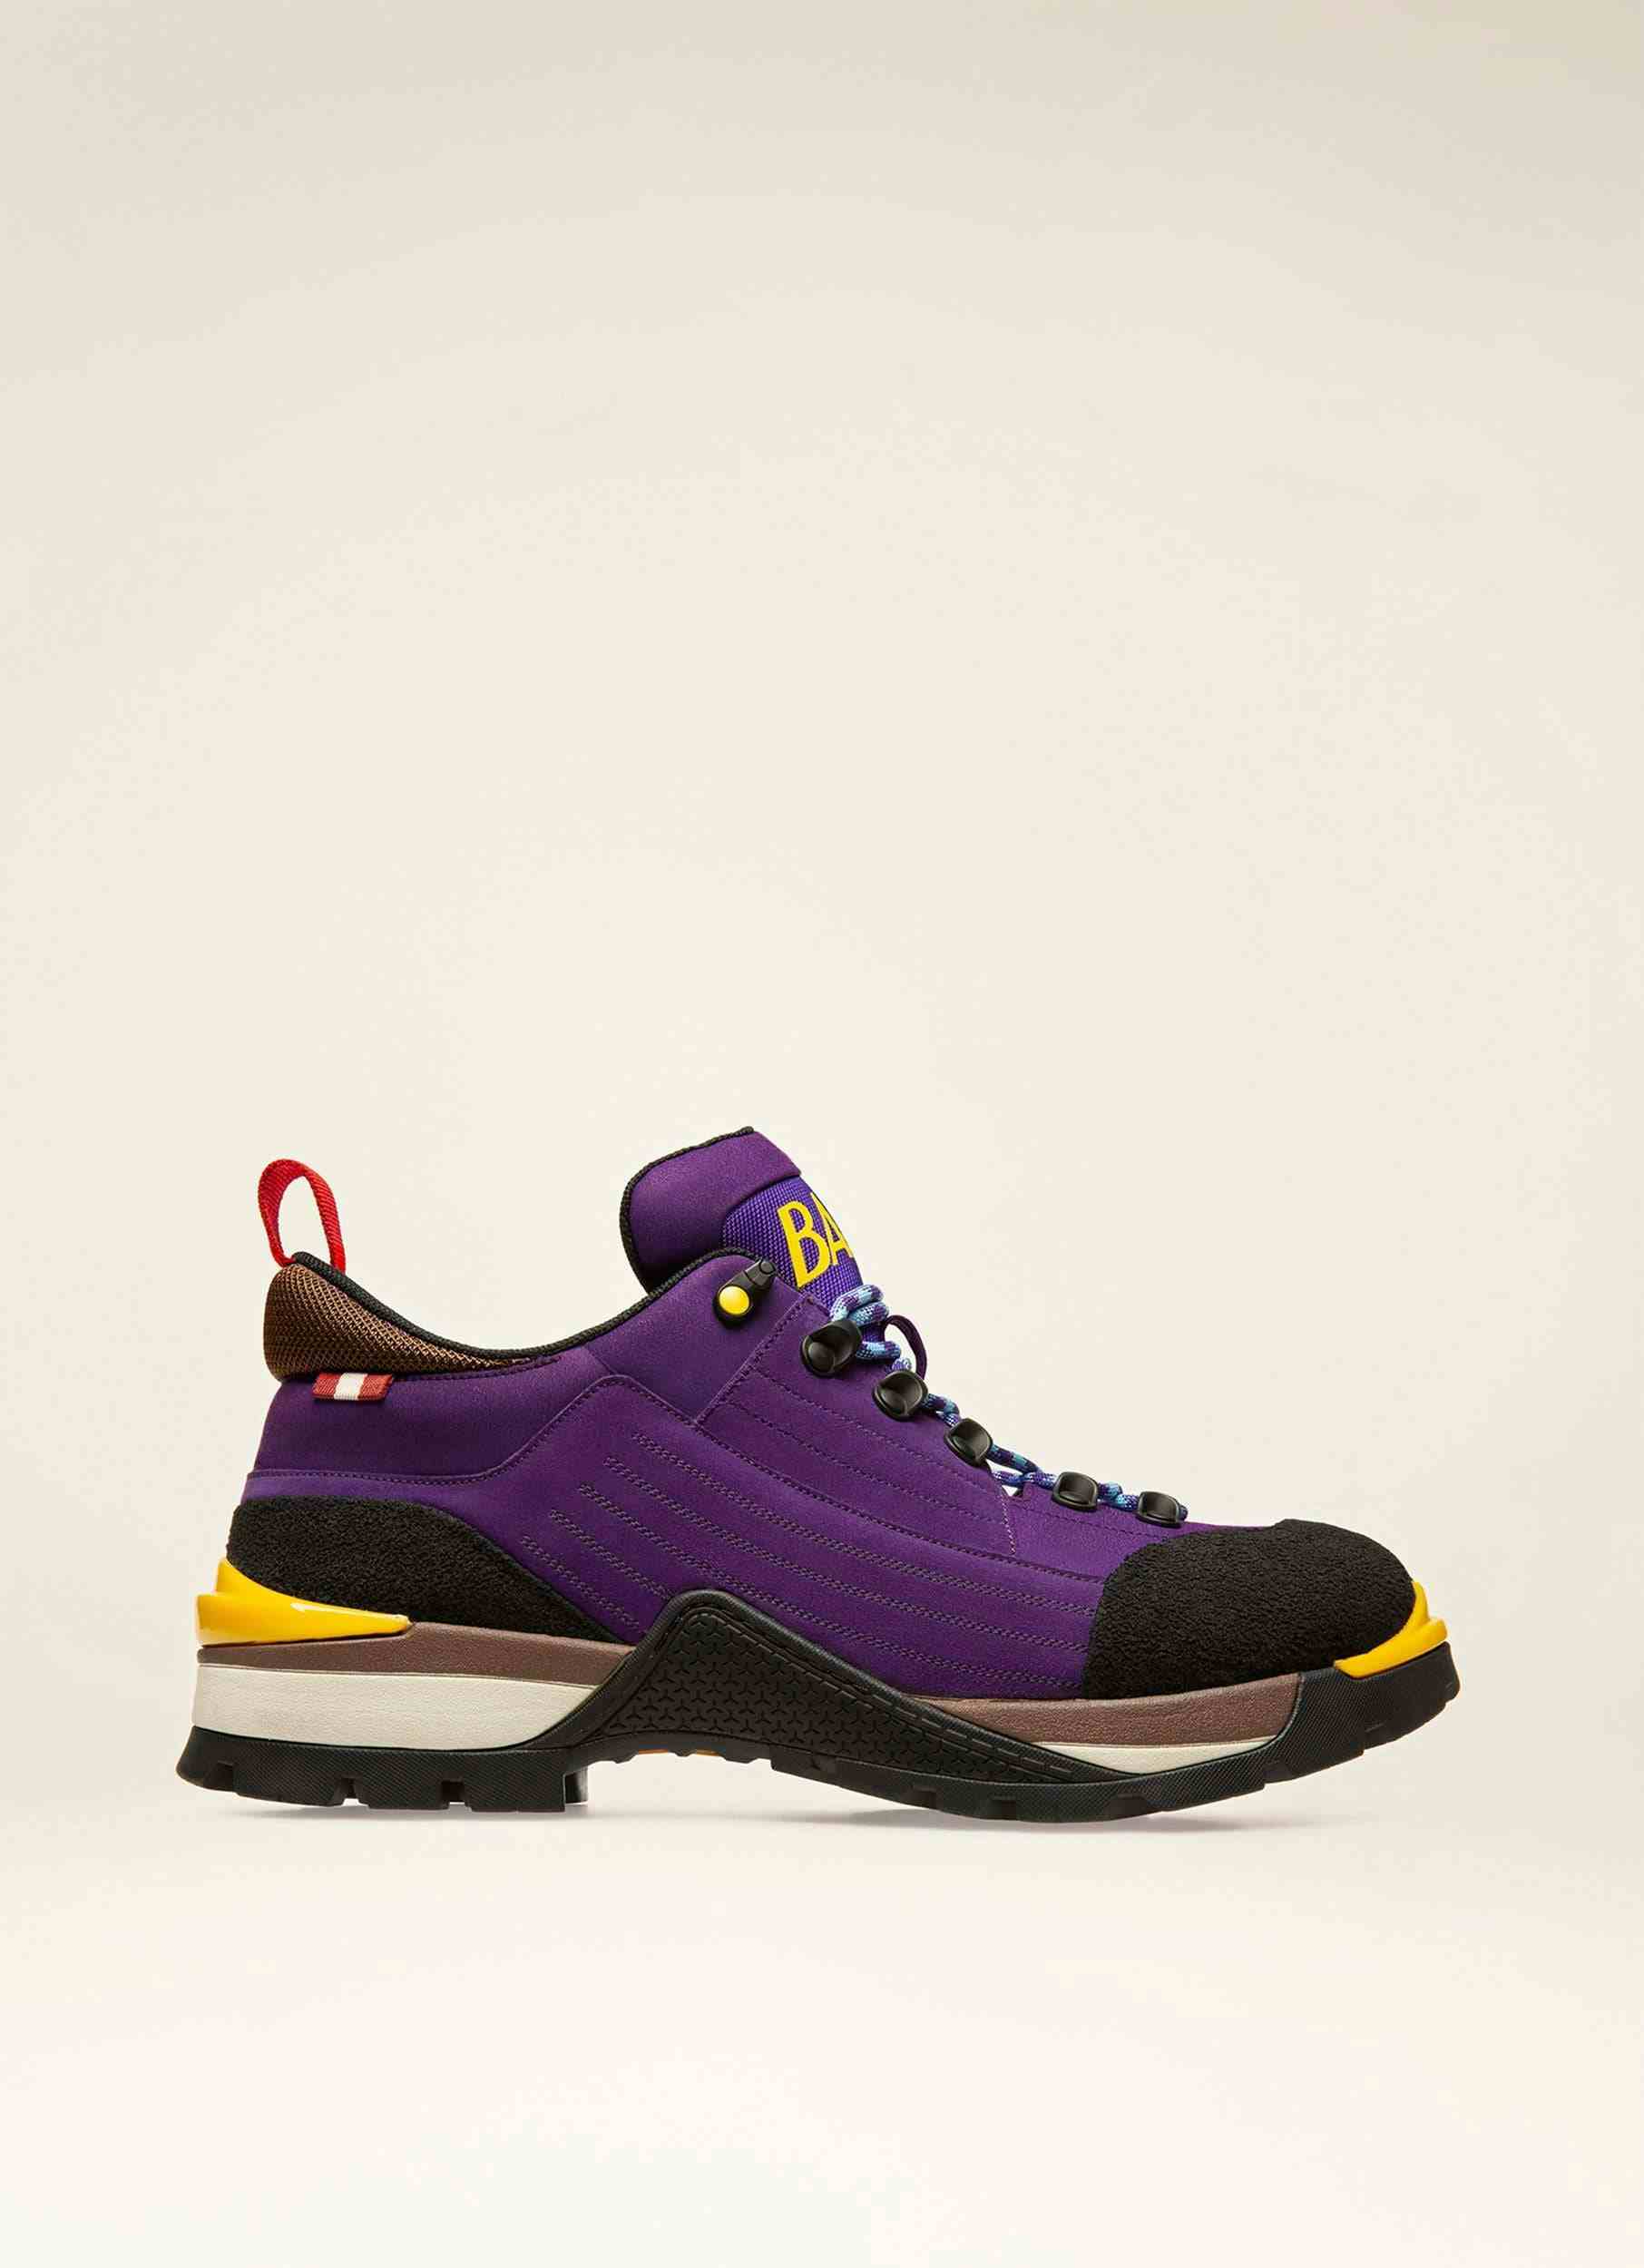 BALLY HIKE Suede Hiking Shoes In Purple - Men's - Bally